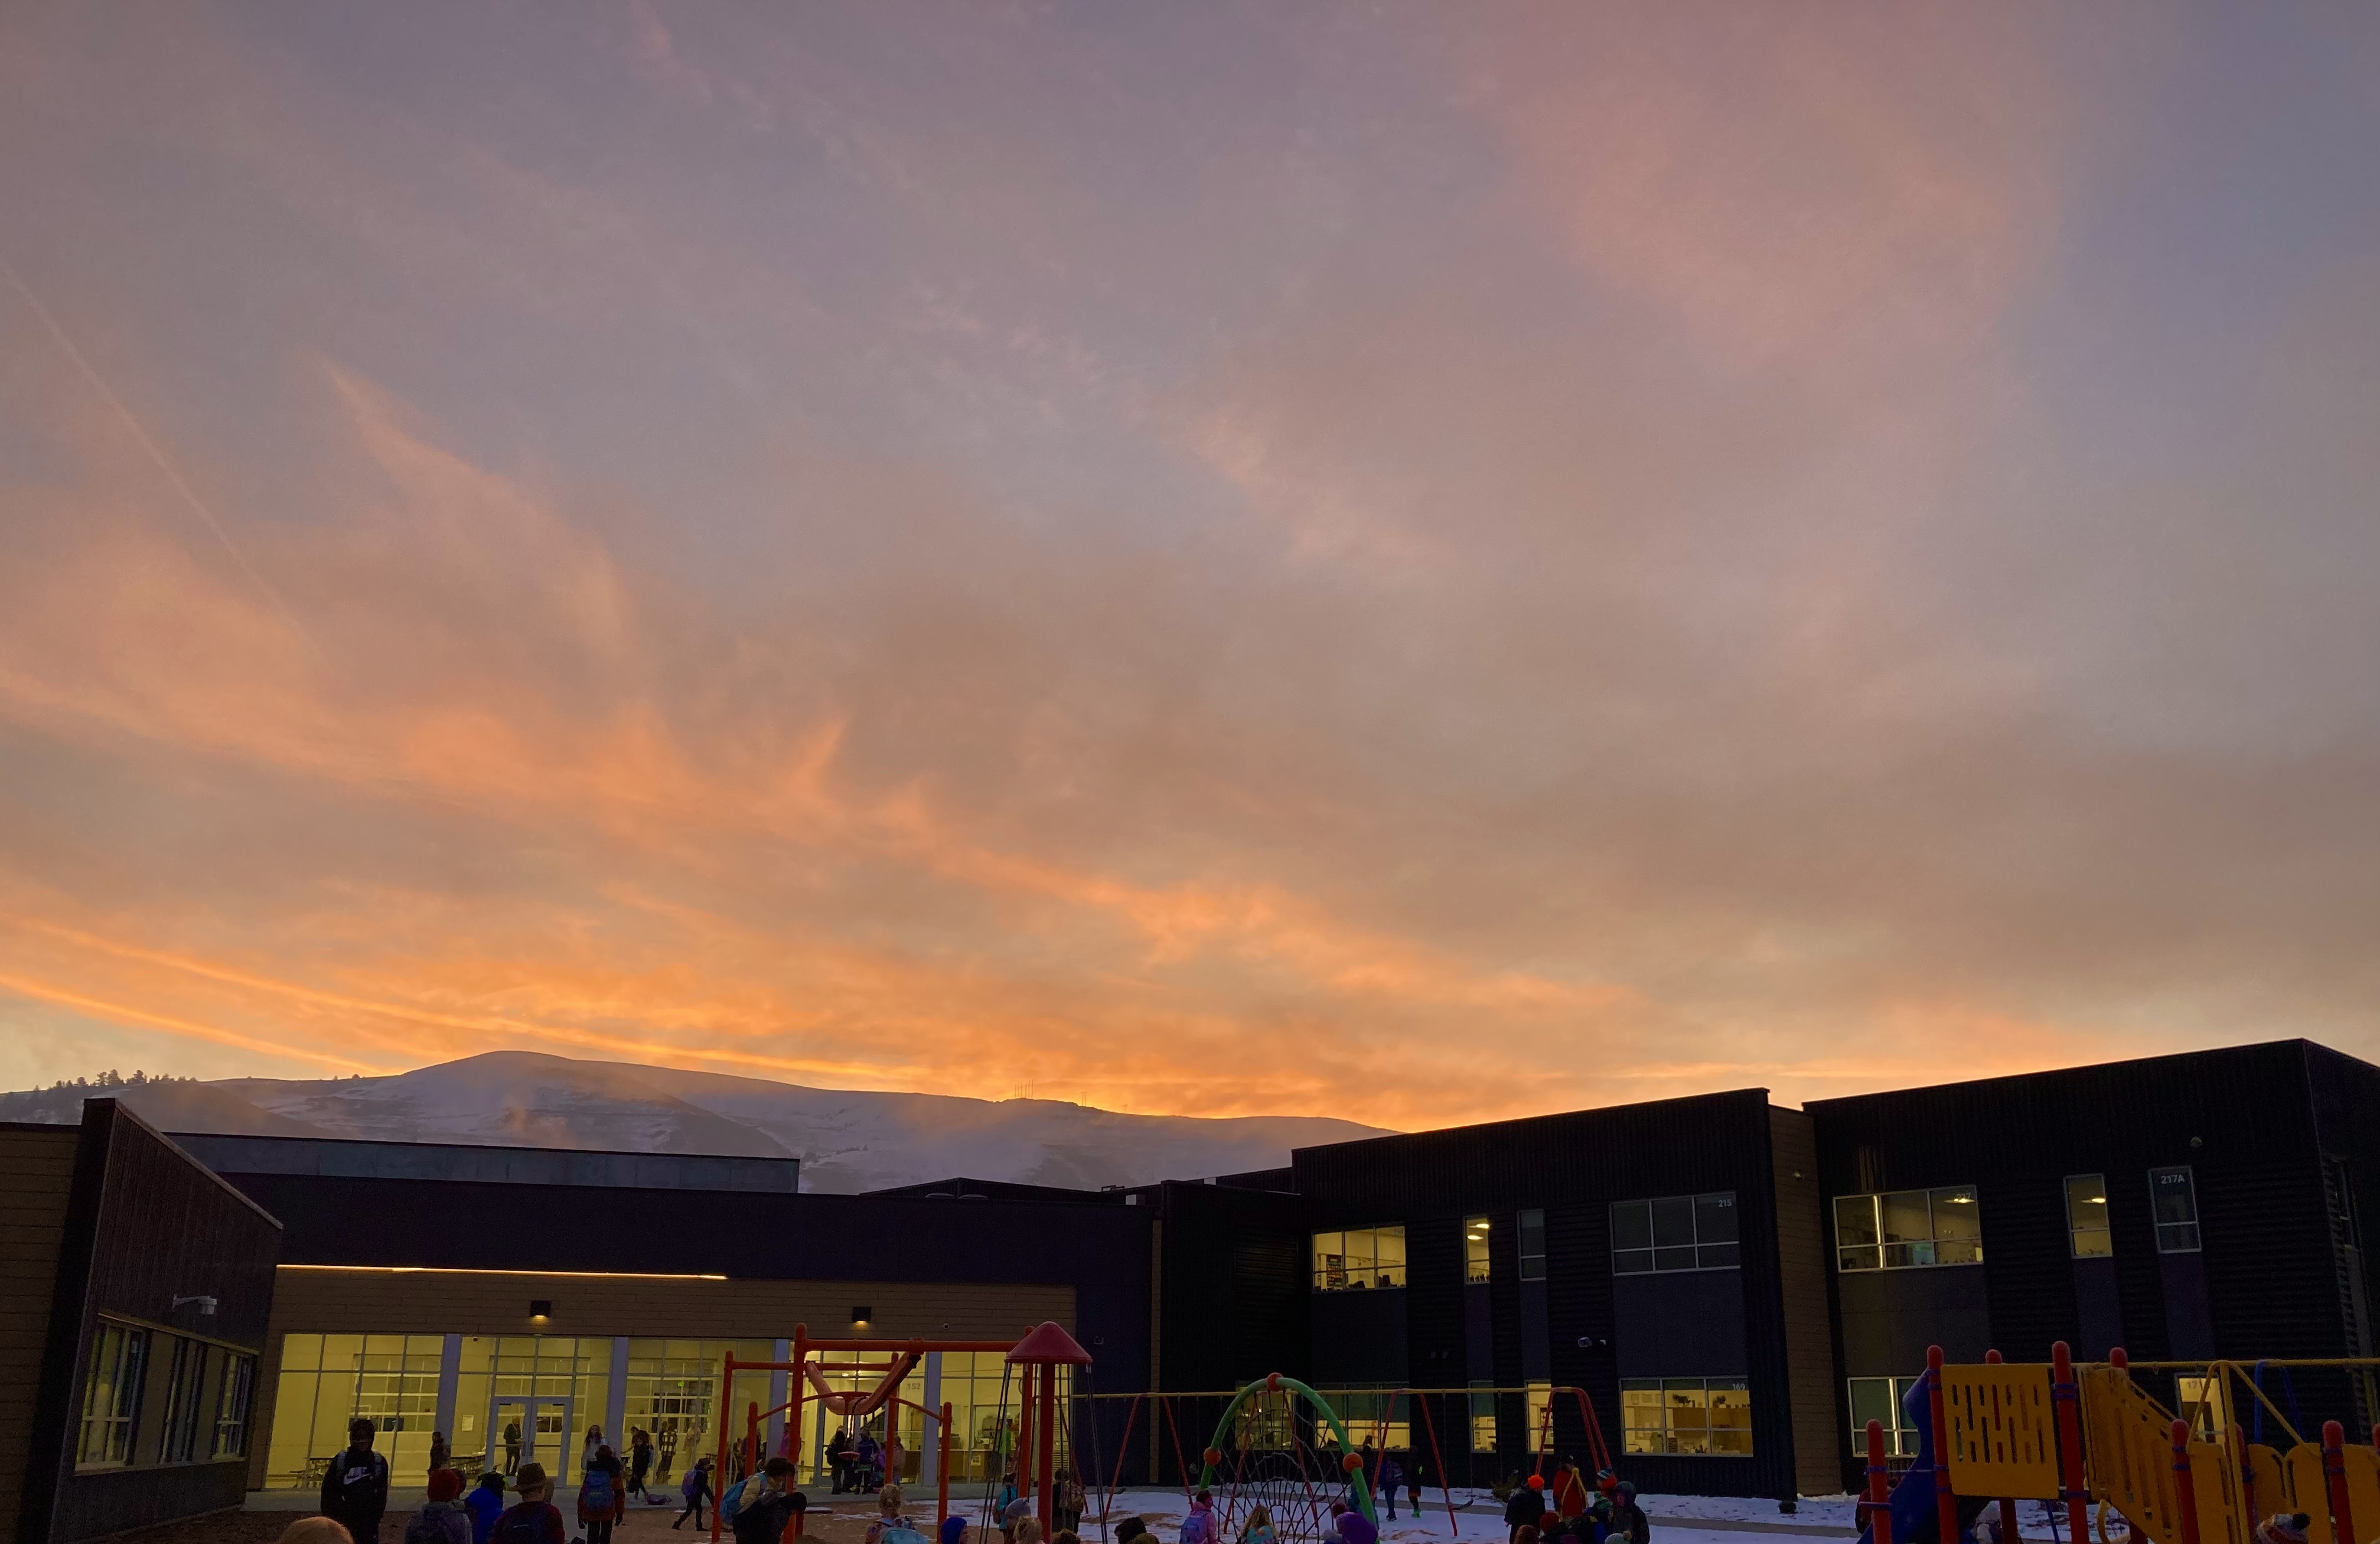 Sunrise from the new school